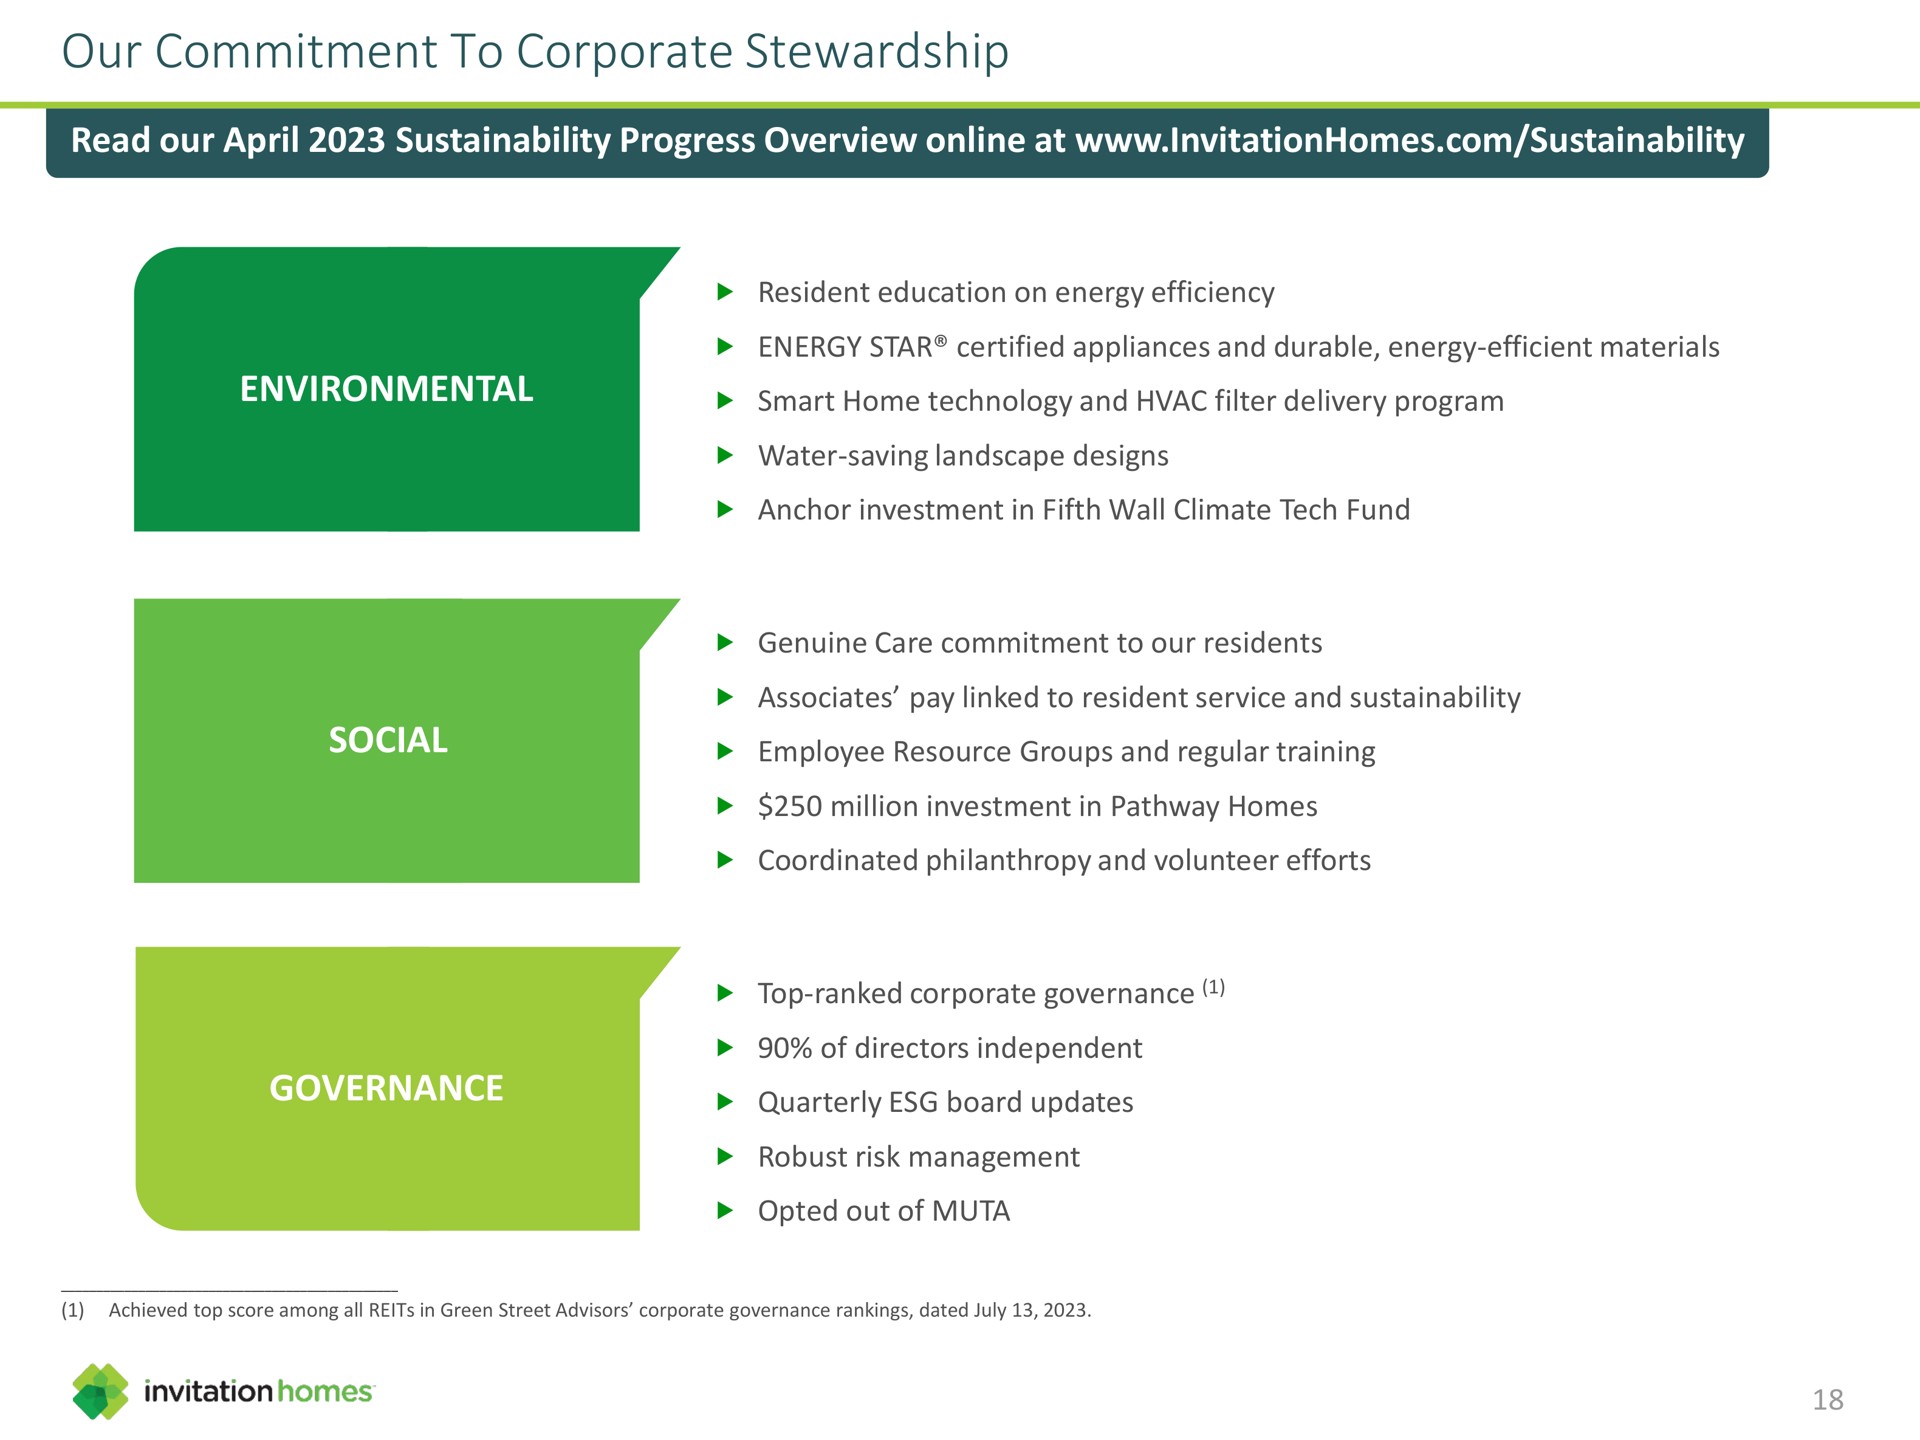 our commitment to corporate stewardship read our progress overview at environmental social governance | Invitation Homes